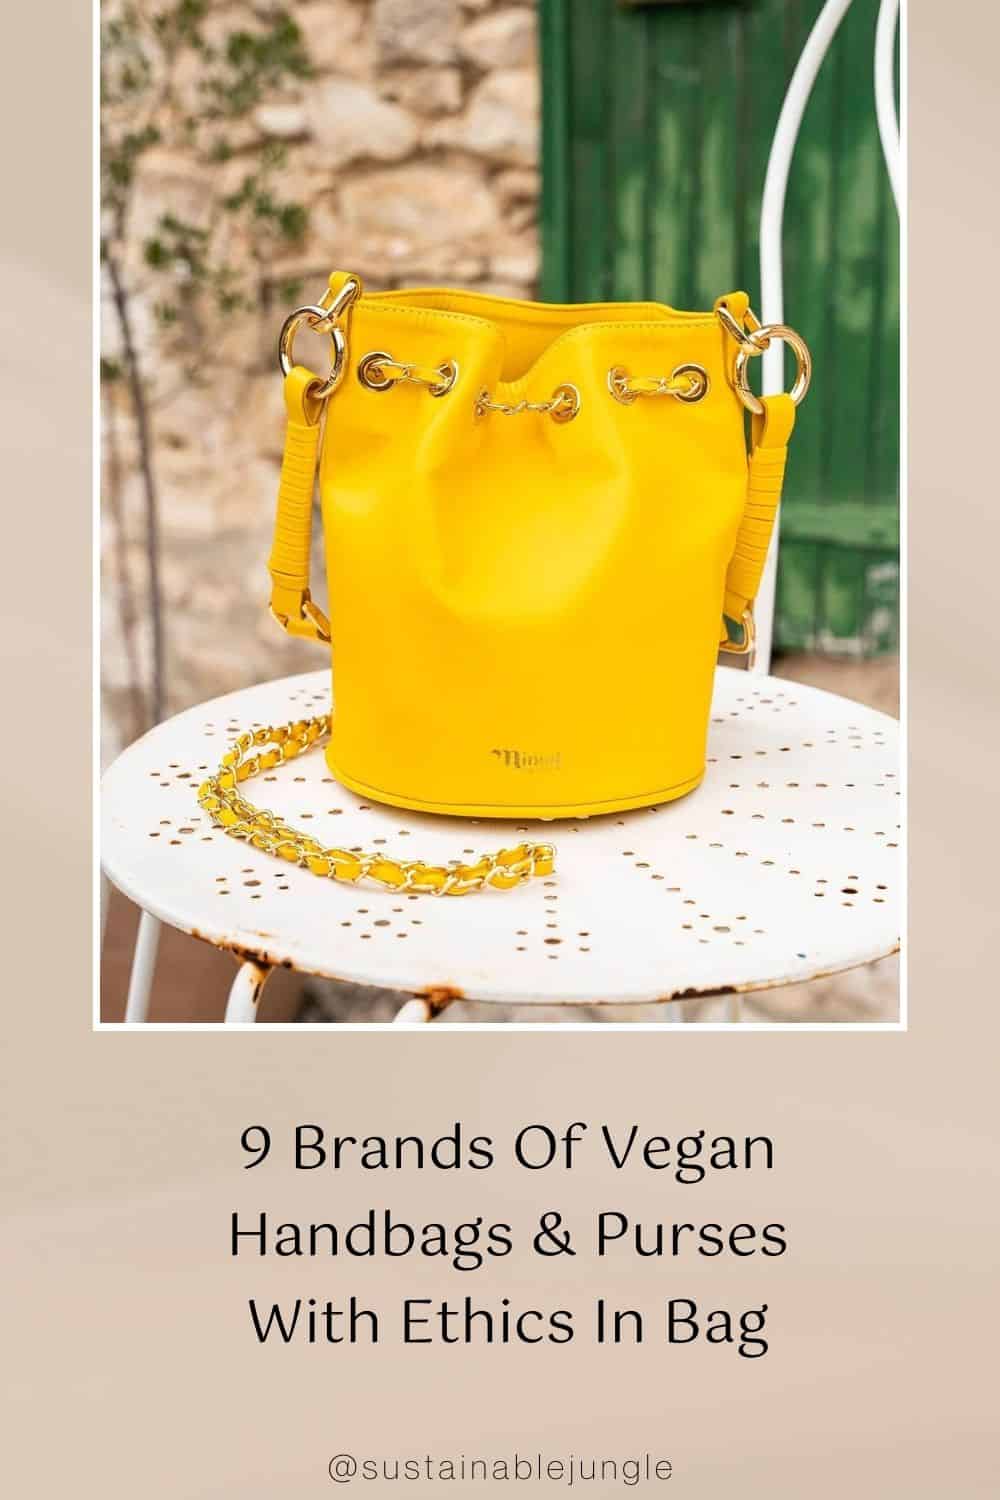 9 Brands Of Vegan Handbags & Purses With Ethics In Bag Image by Watson and Wolf #veganhandbags #veganleatherhandbags #veganbags #veganpurses #bestveganleatherpurses #petaapprovedveganpurse #sustainablejungle